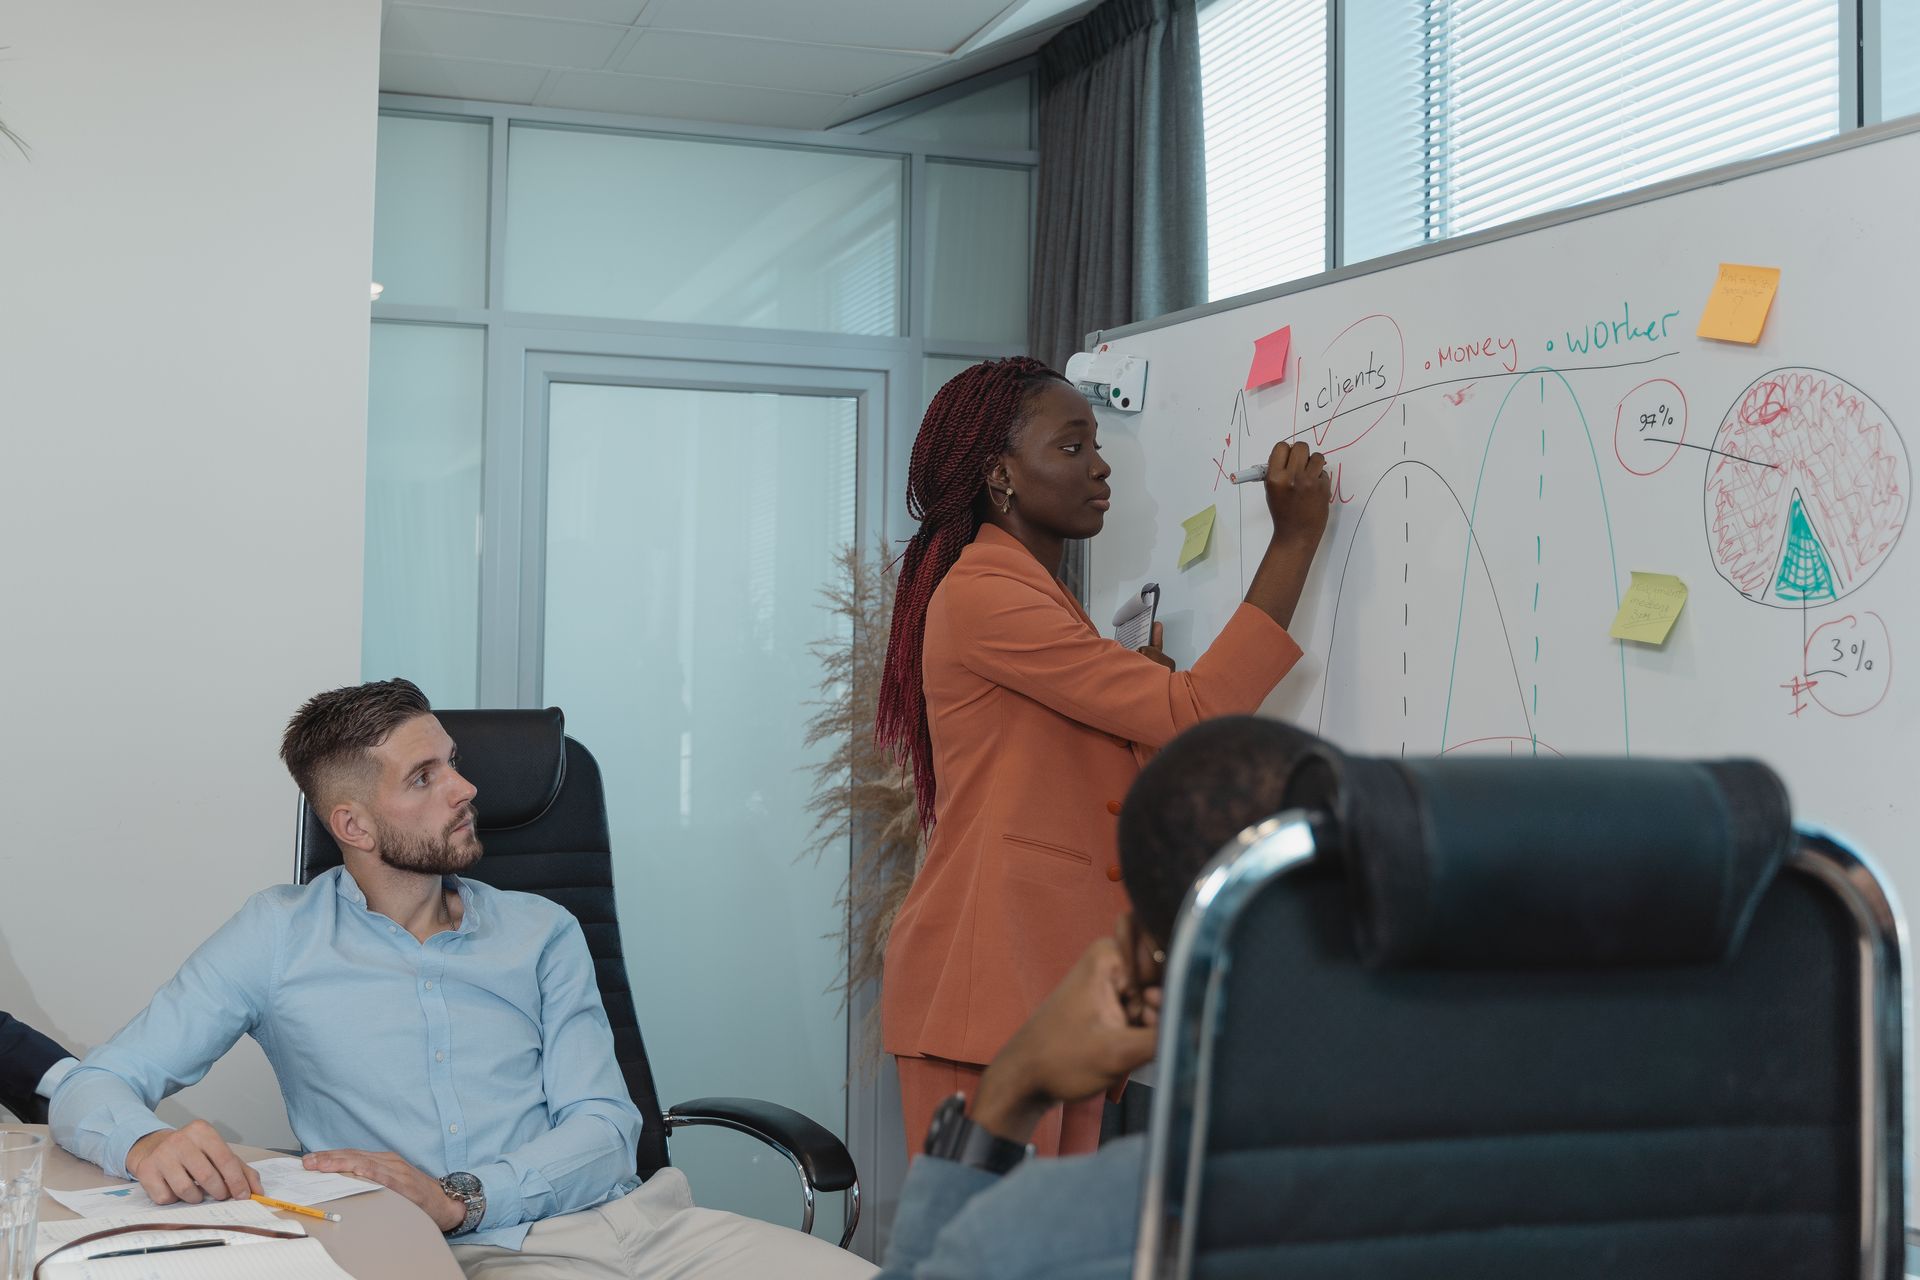 a group of people are sitting around a whiteboard in an office .